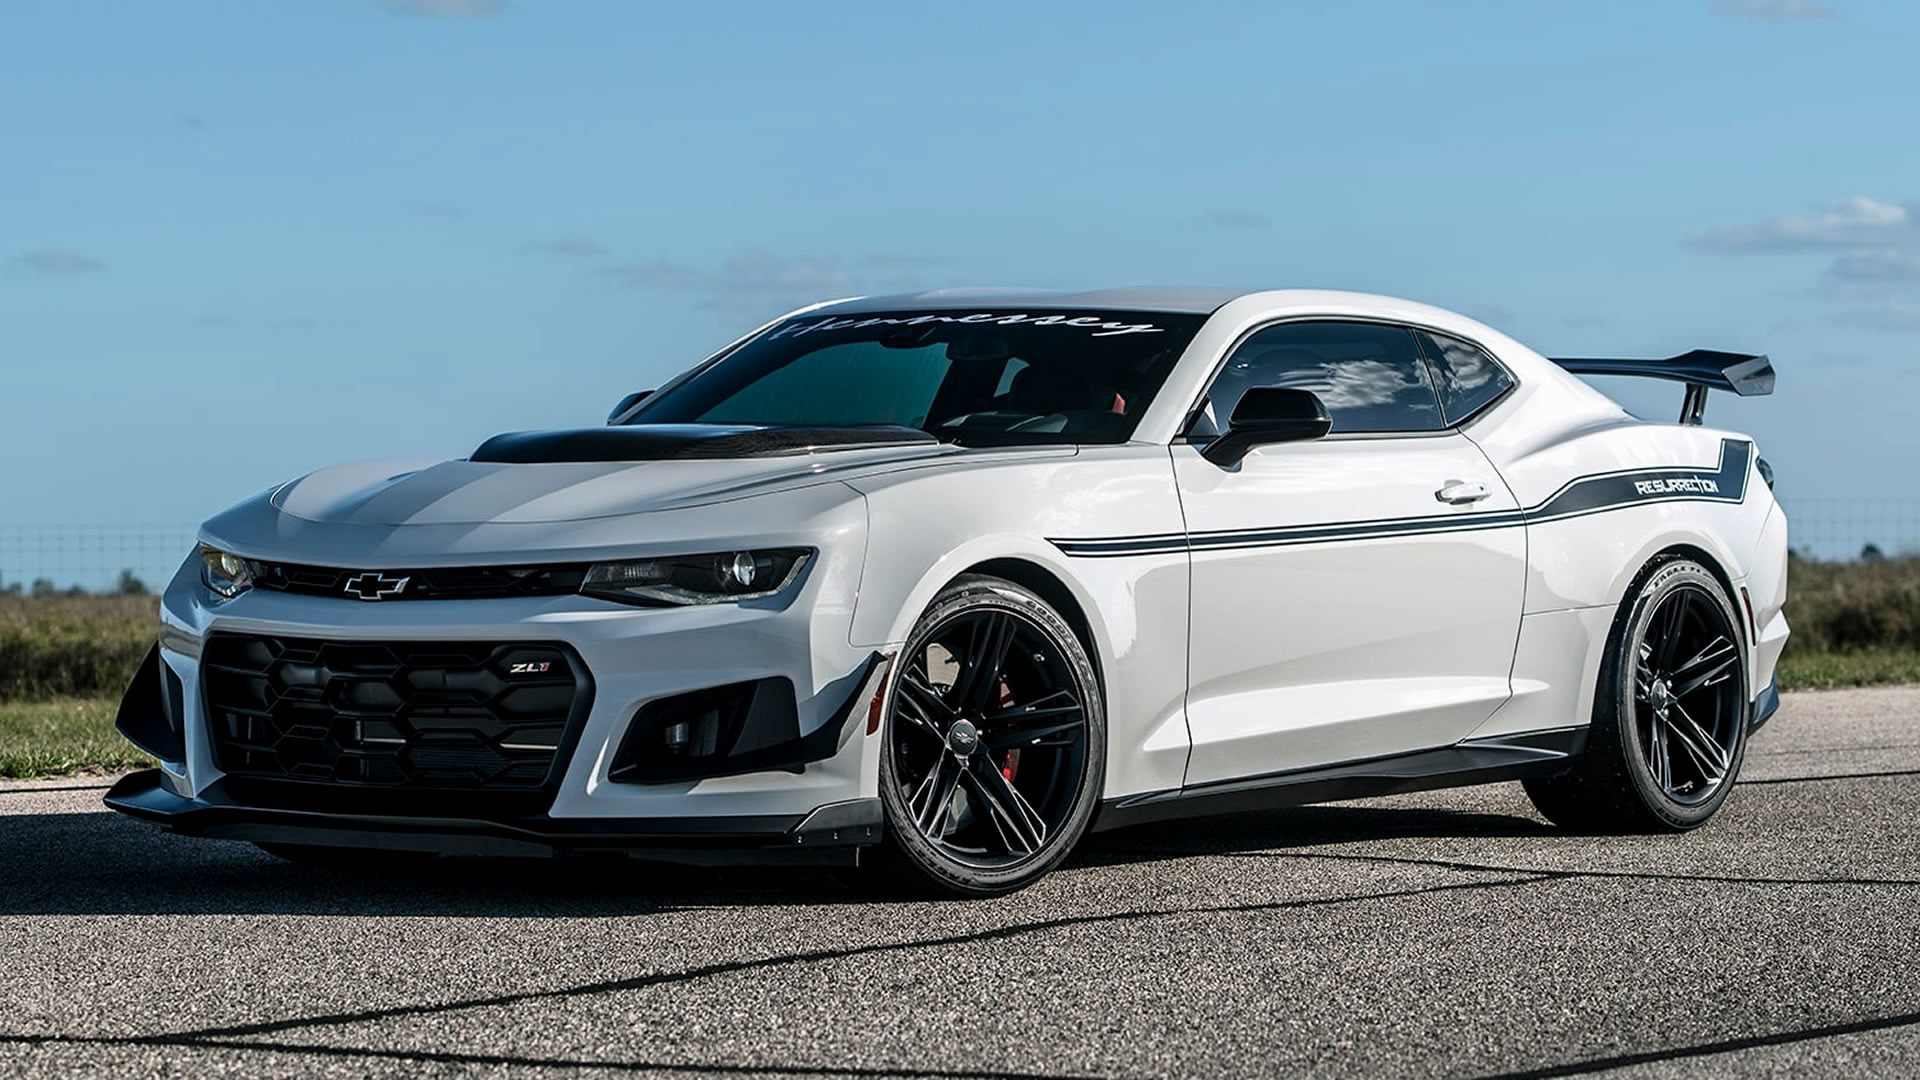 2019 Chevrolet Camaro Zl1 1le The Resurrection By Hennessey